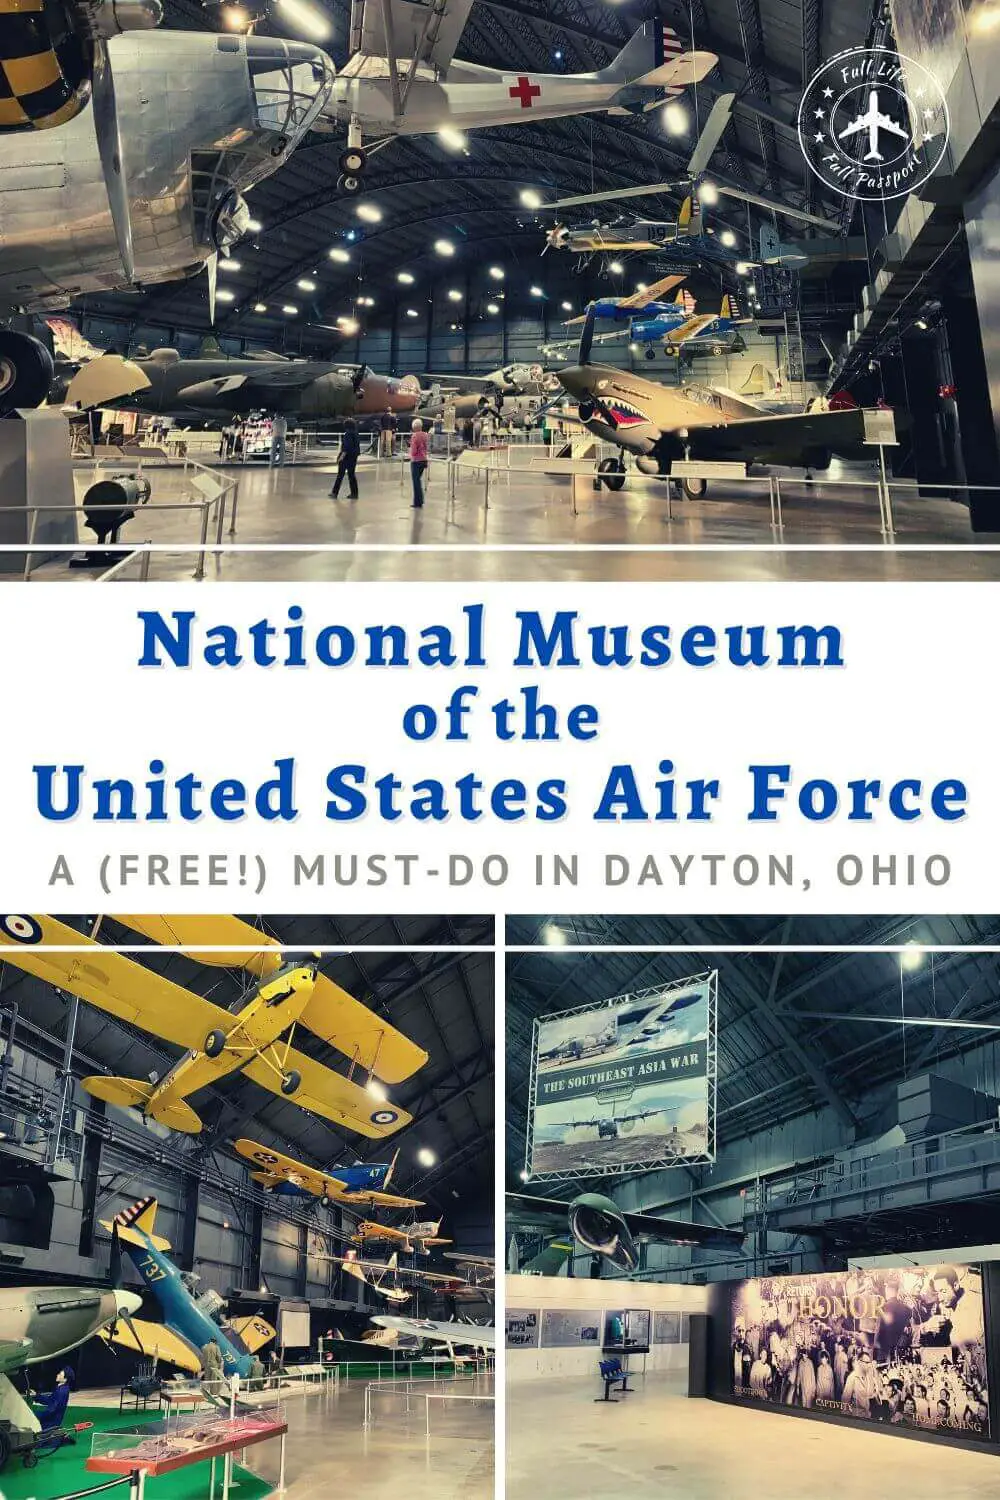 The National Museum of the United States Air Force: Dayton, Ohio\'s Best Free Activity